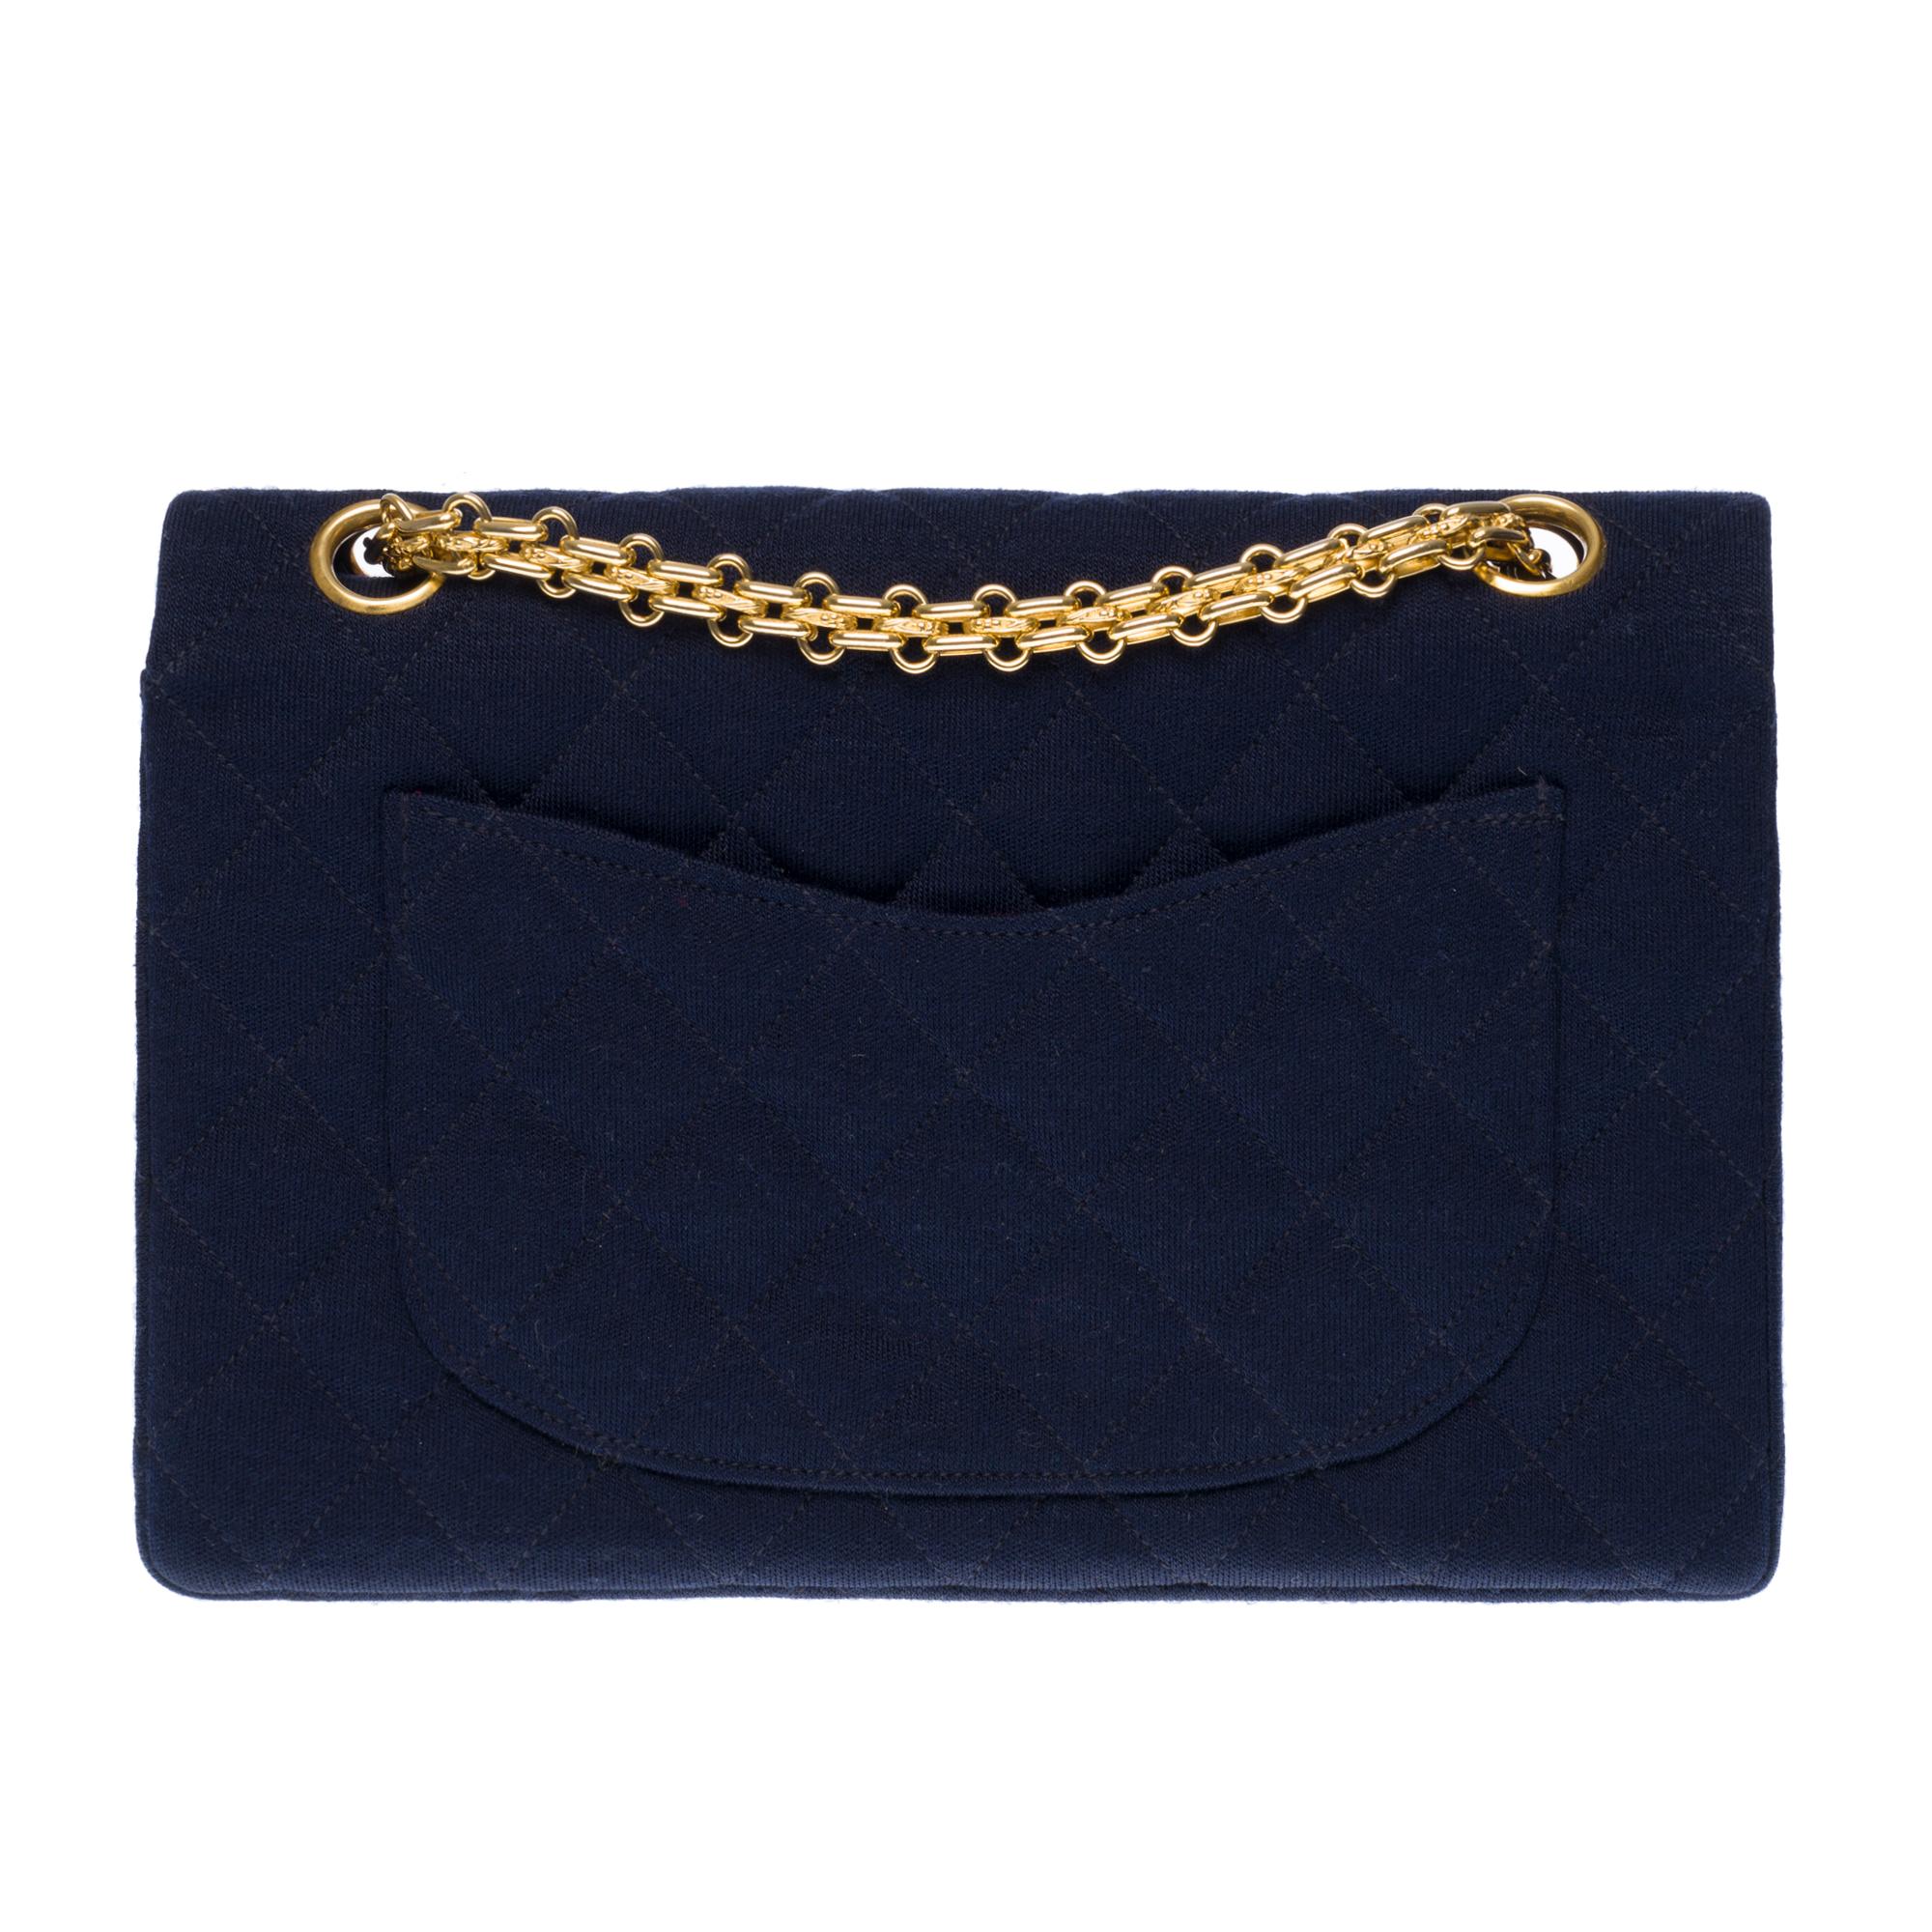 Superb Timeless/Classic bag with double flap in navy blue quilted jersey , gold metal hardware, Mademoiselle chain handle in gold metal allowing a hand or shoulder support.
Quilted flap closure, gold metal CC closure.
Lining in red canvas, a double